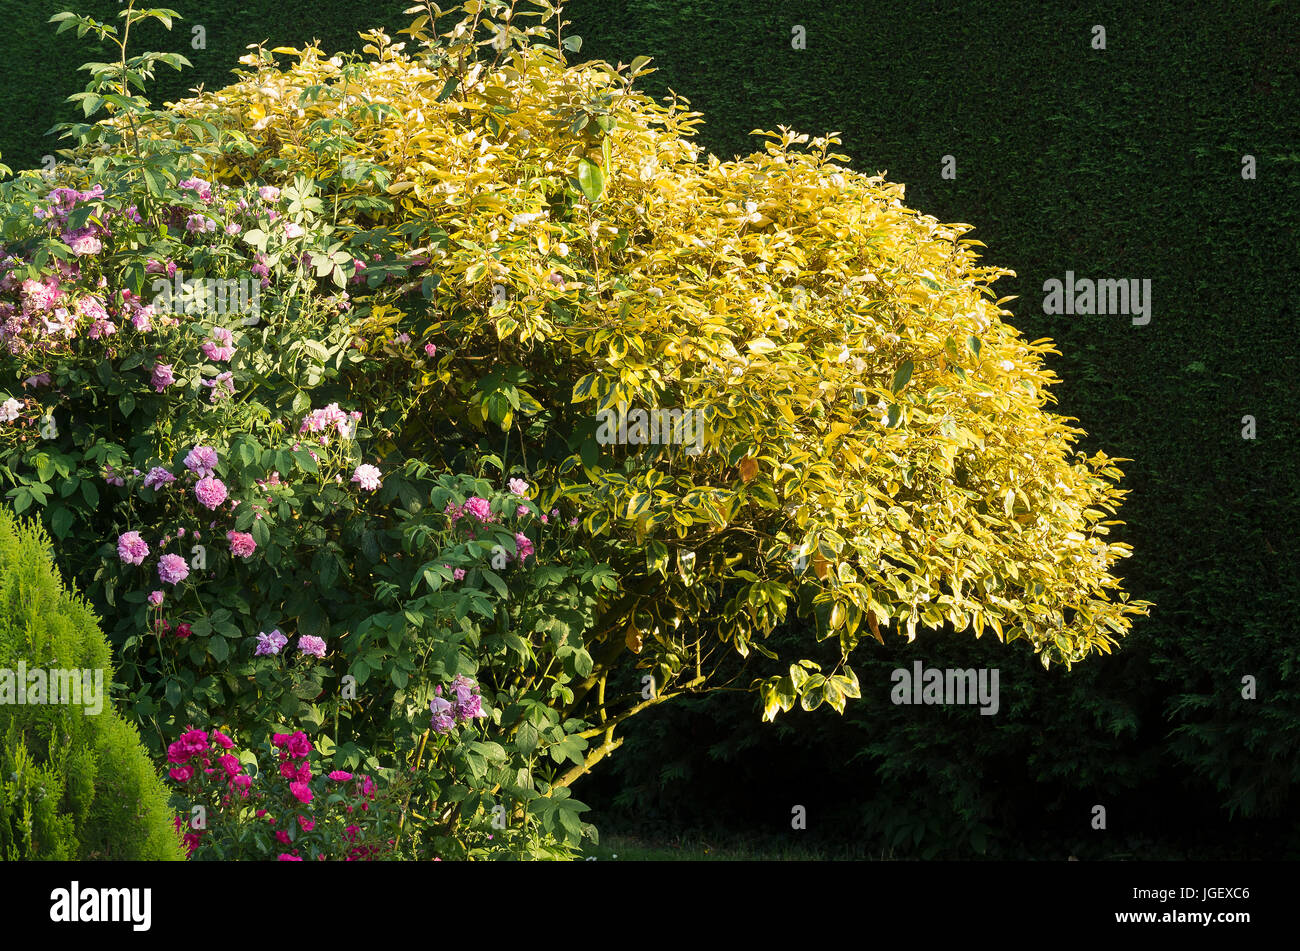 A variegated  eleagnus x ebbingei Gilt Edge is a focal point of a mixed border of roses and herbaceous plants. A dark conifer hedge background Stock Photo